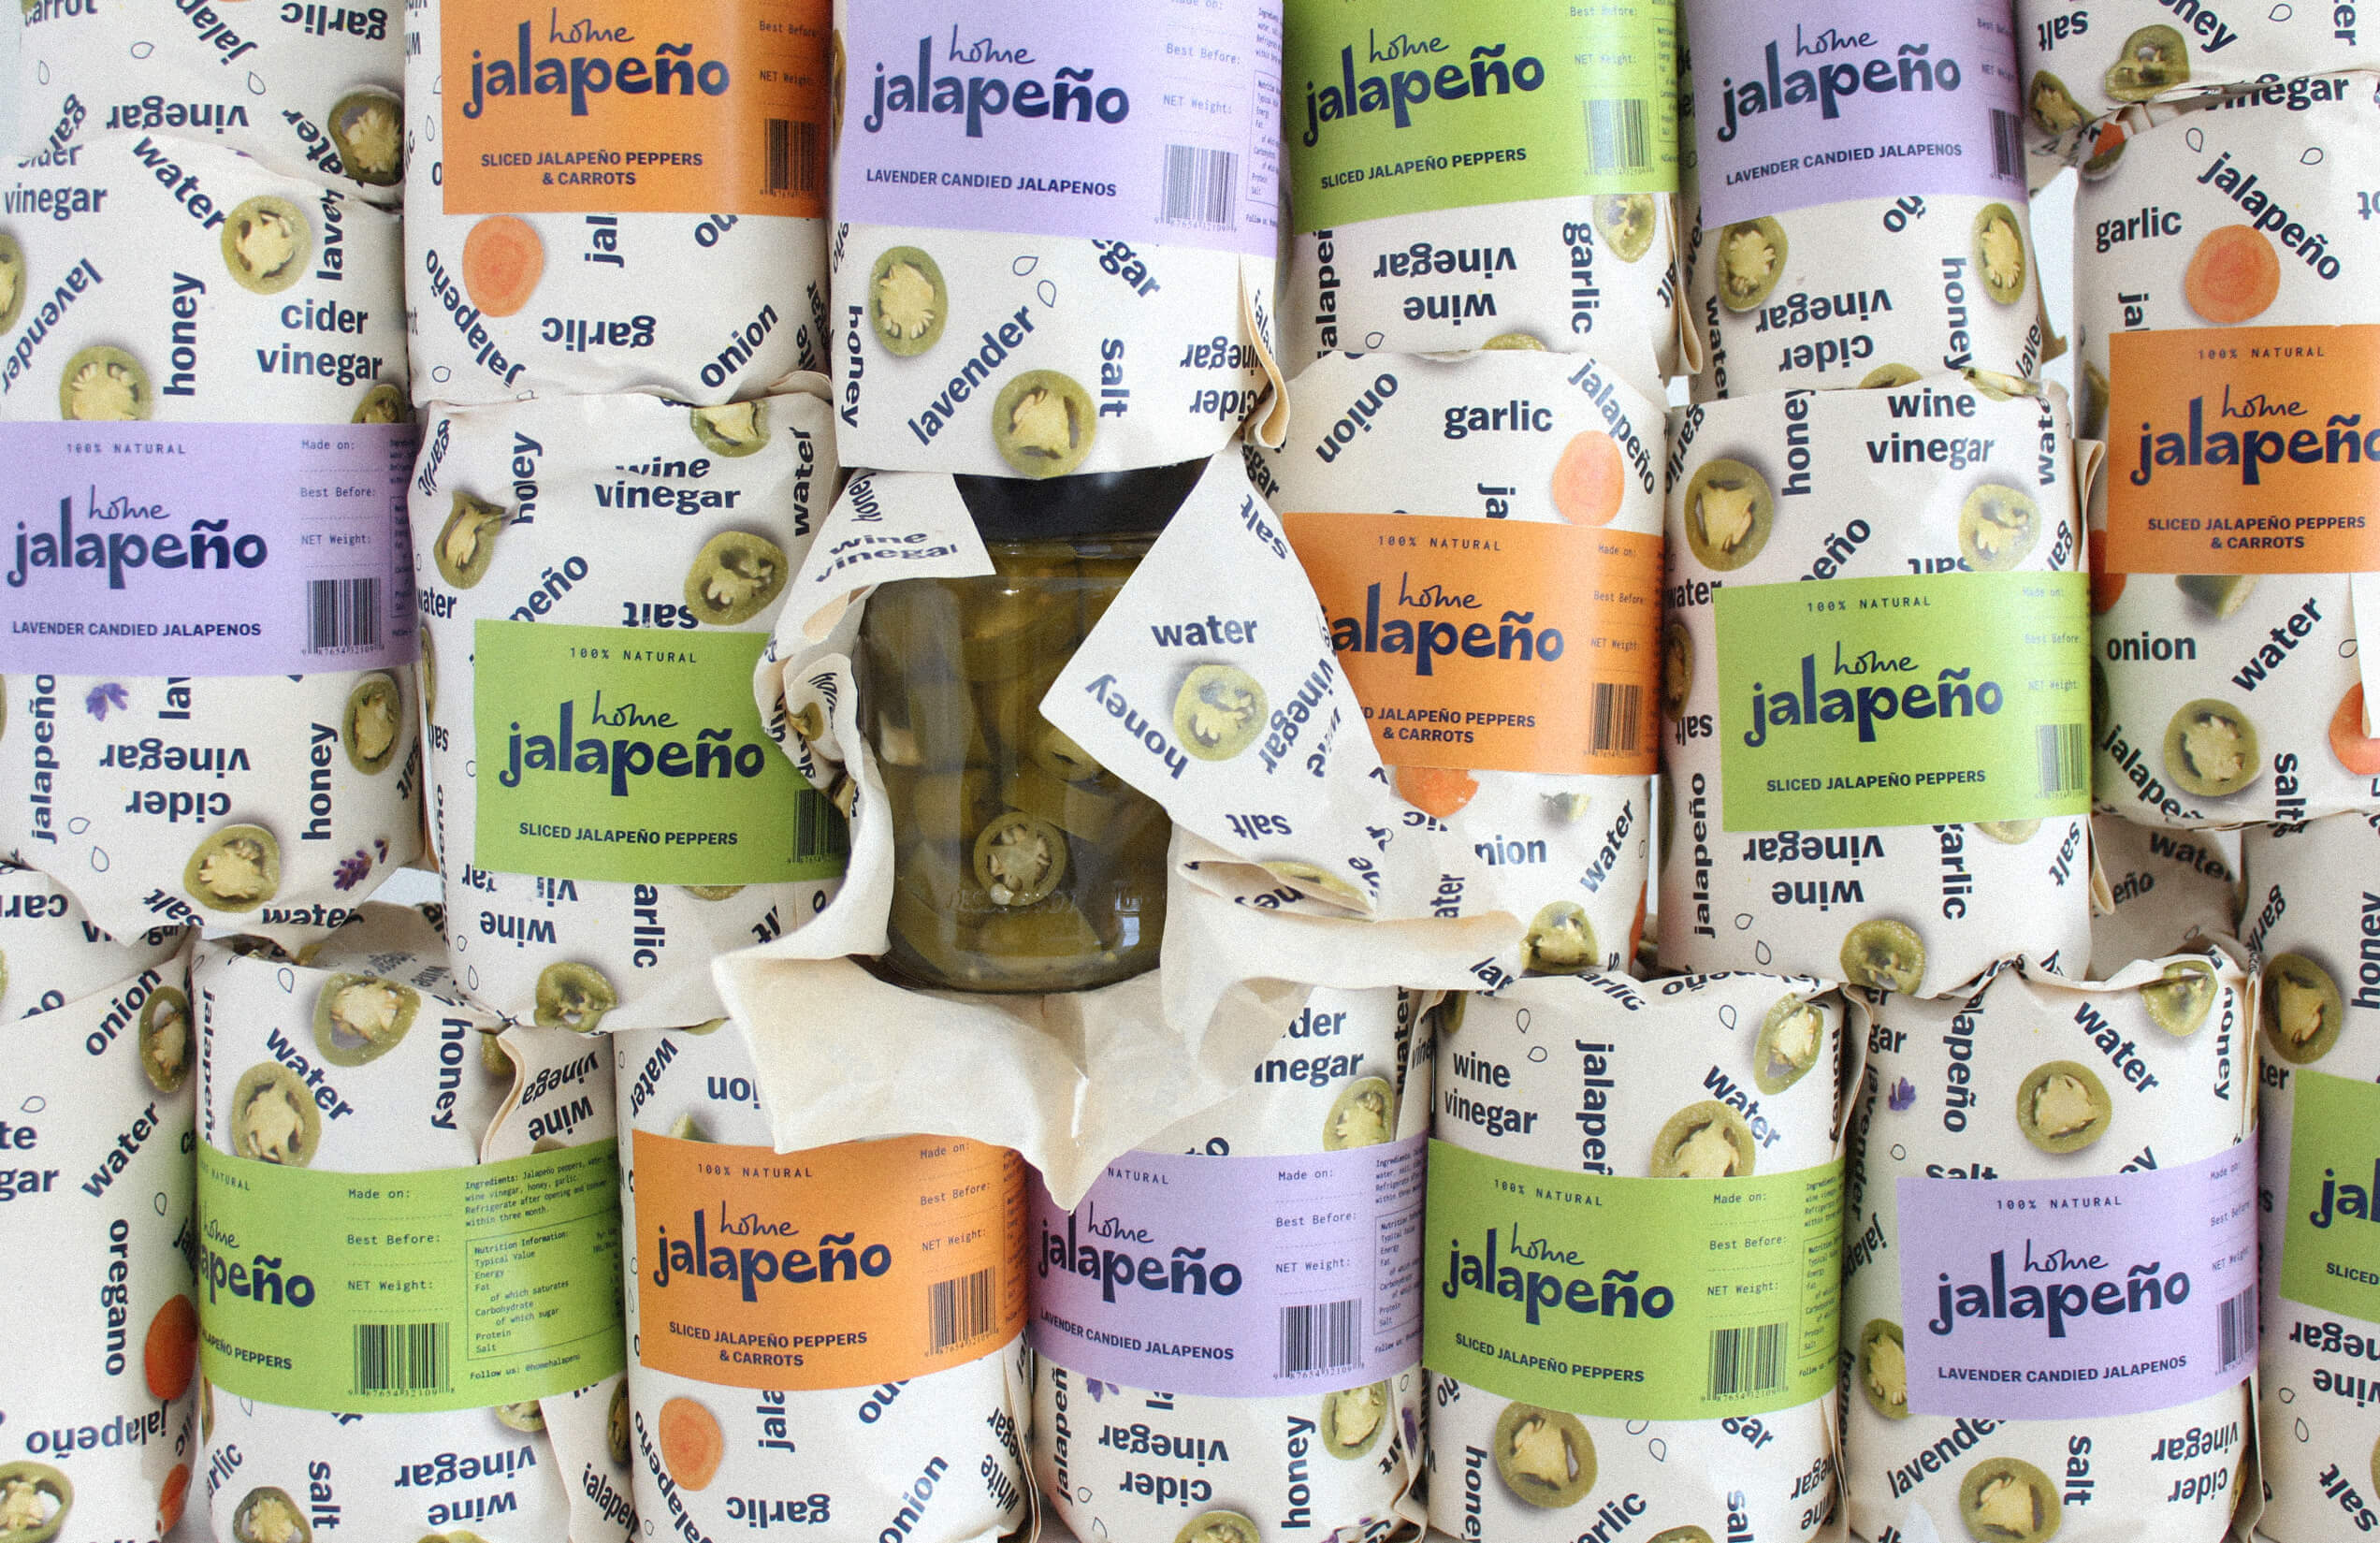 Home Jalapeño Brand and Packaging Design Created by Thisis Peas